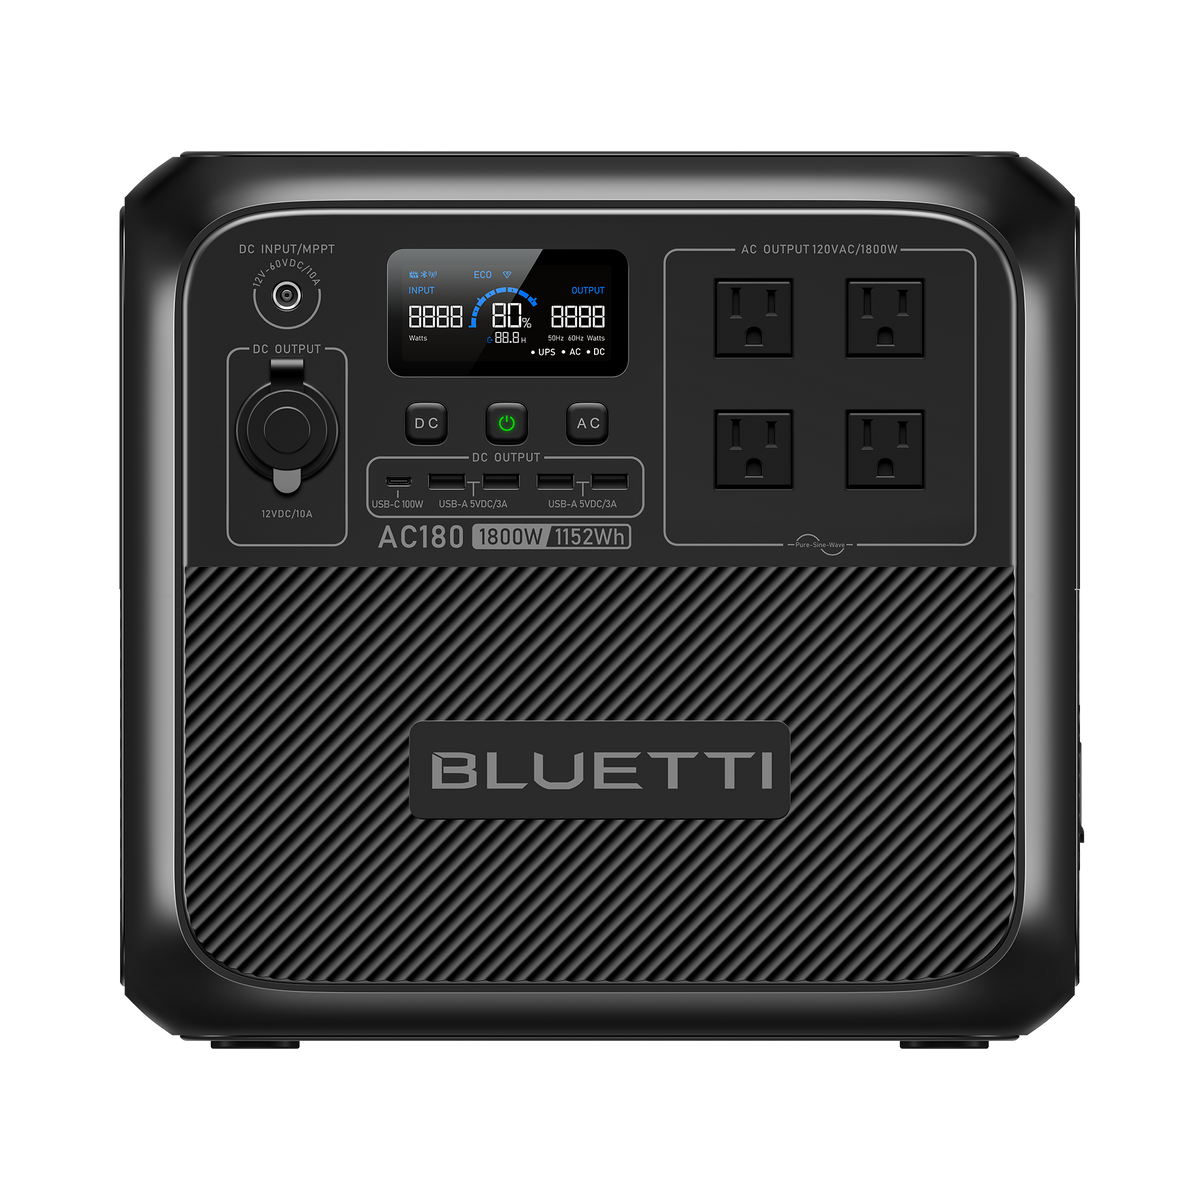 5 Reasons The Bluetti AC180 Should Be Your First Portable Power Station